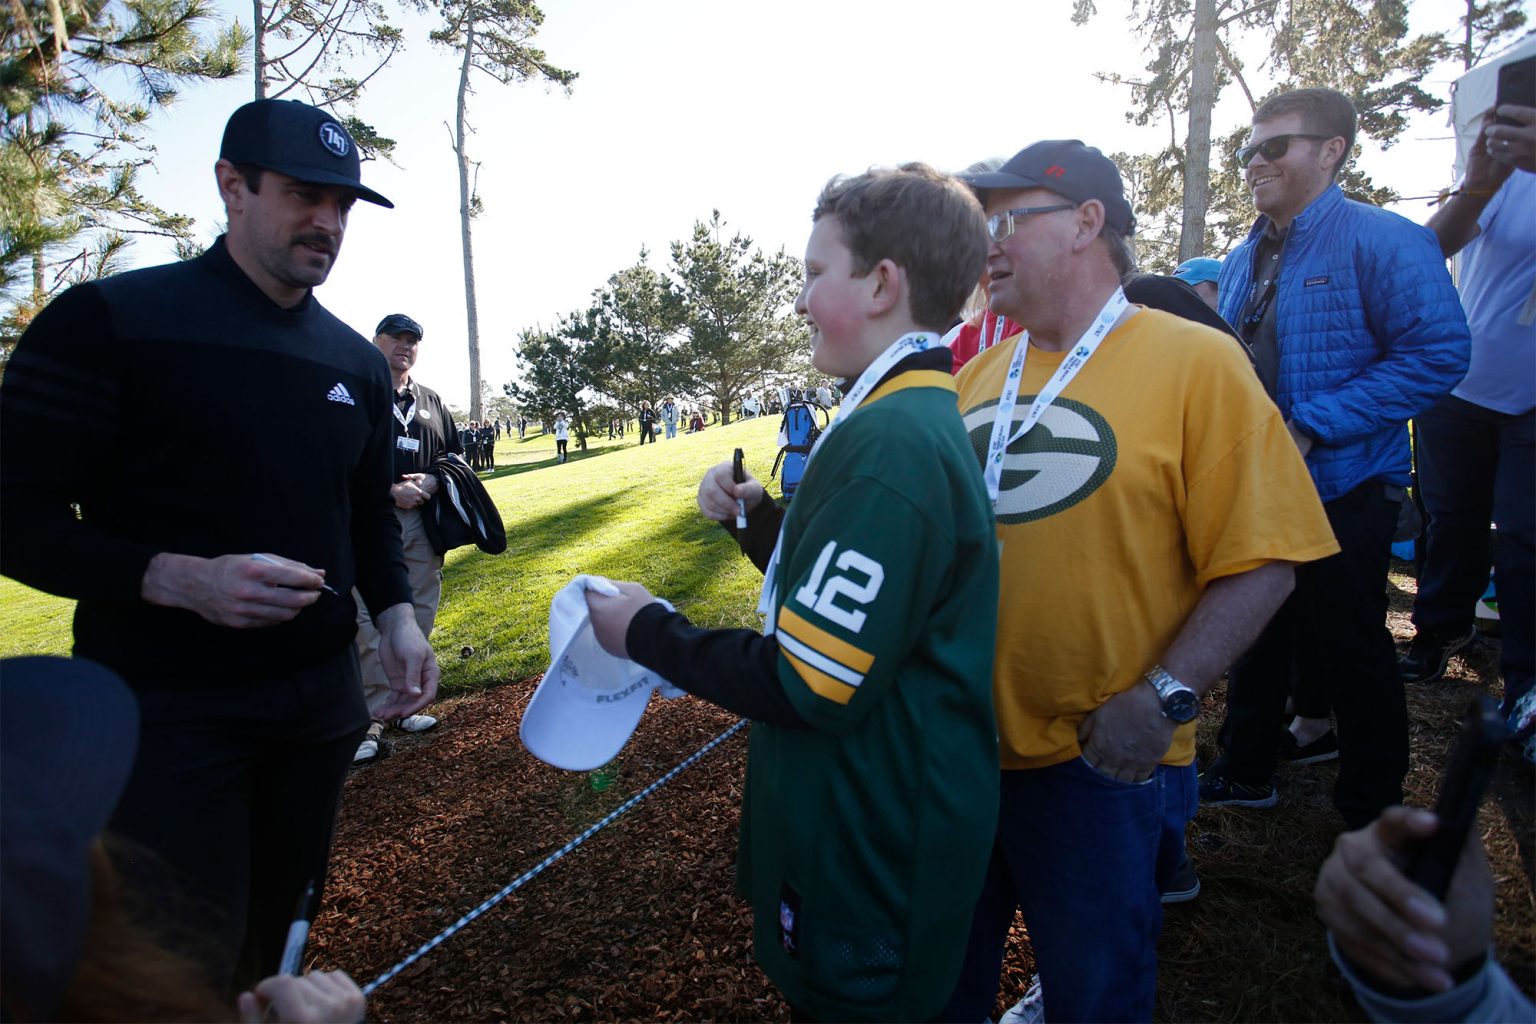 Fans at the 2020 AT&T Pebble Beach Pro-Am